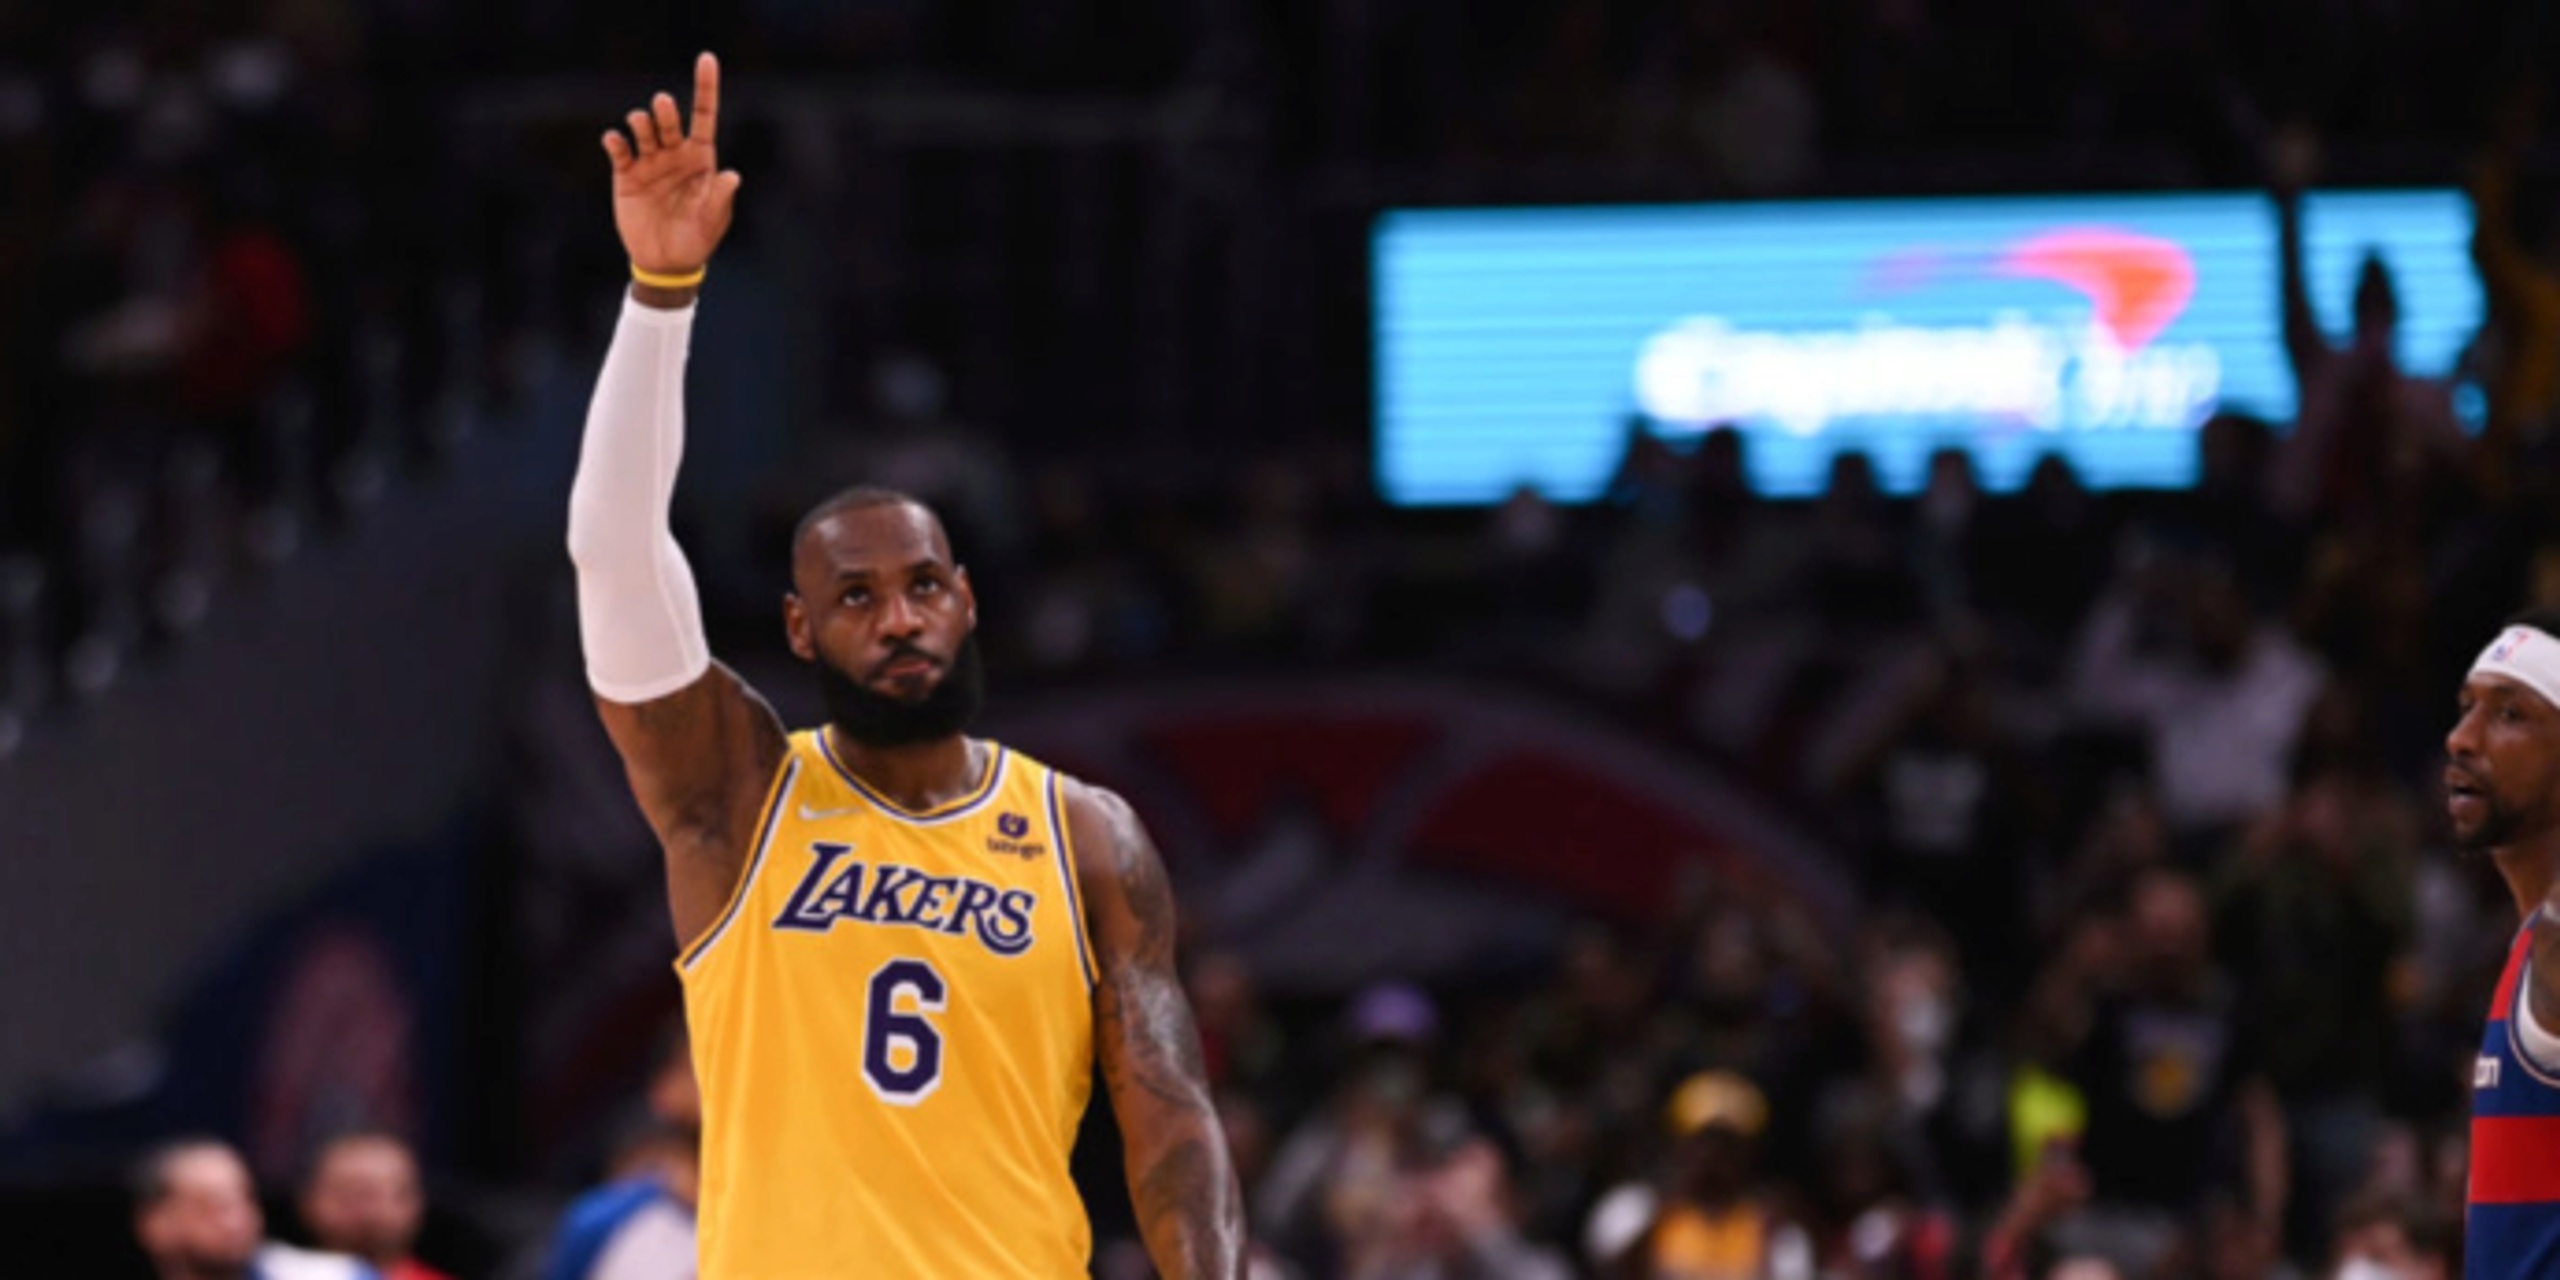 LeBron James passes Karl Malone for 2nd all-time in scoring